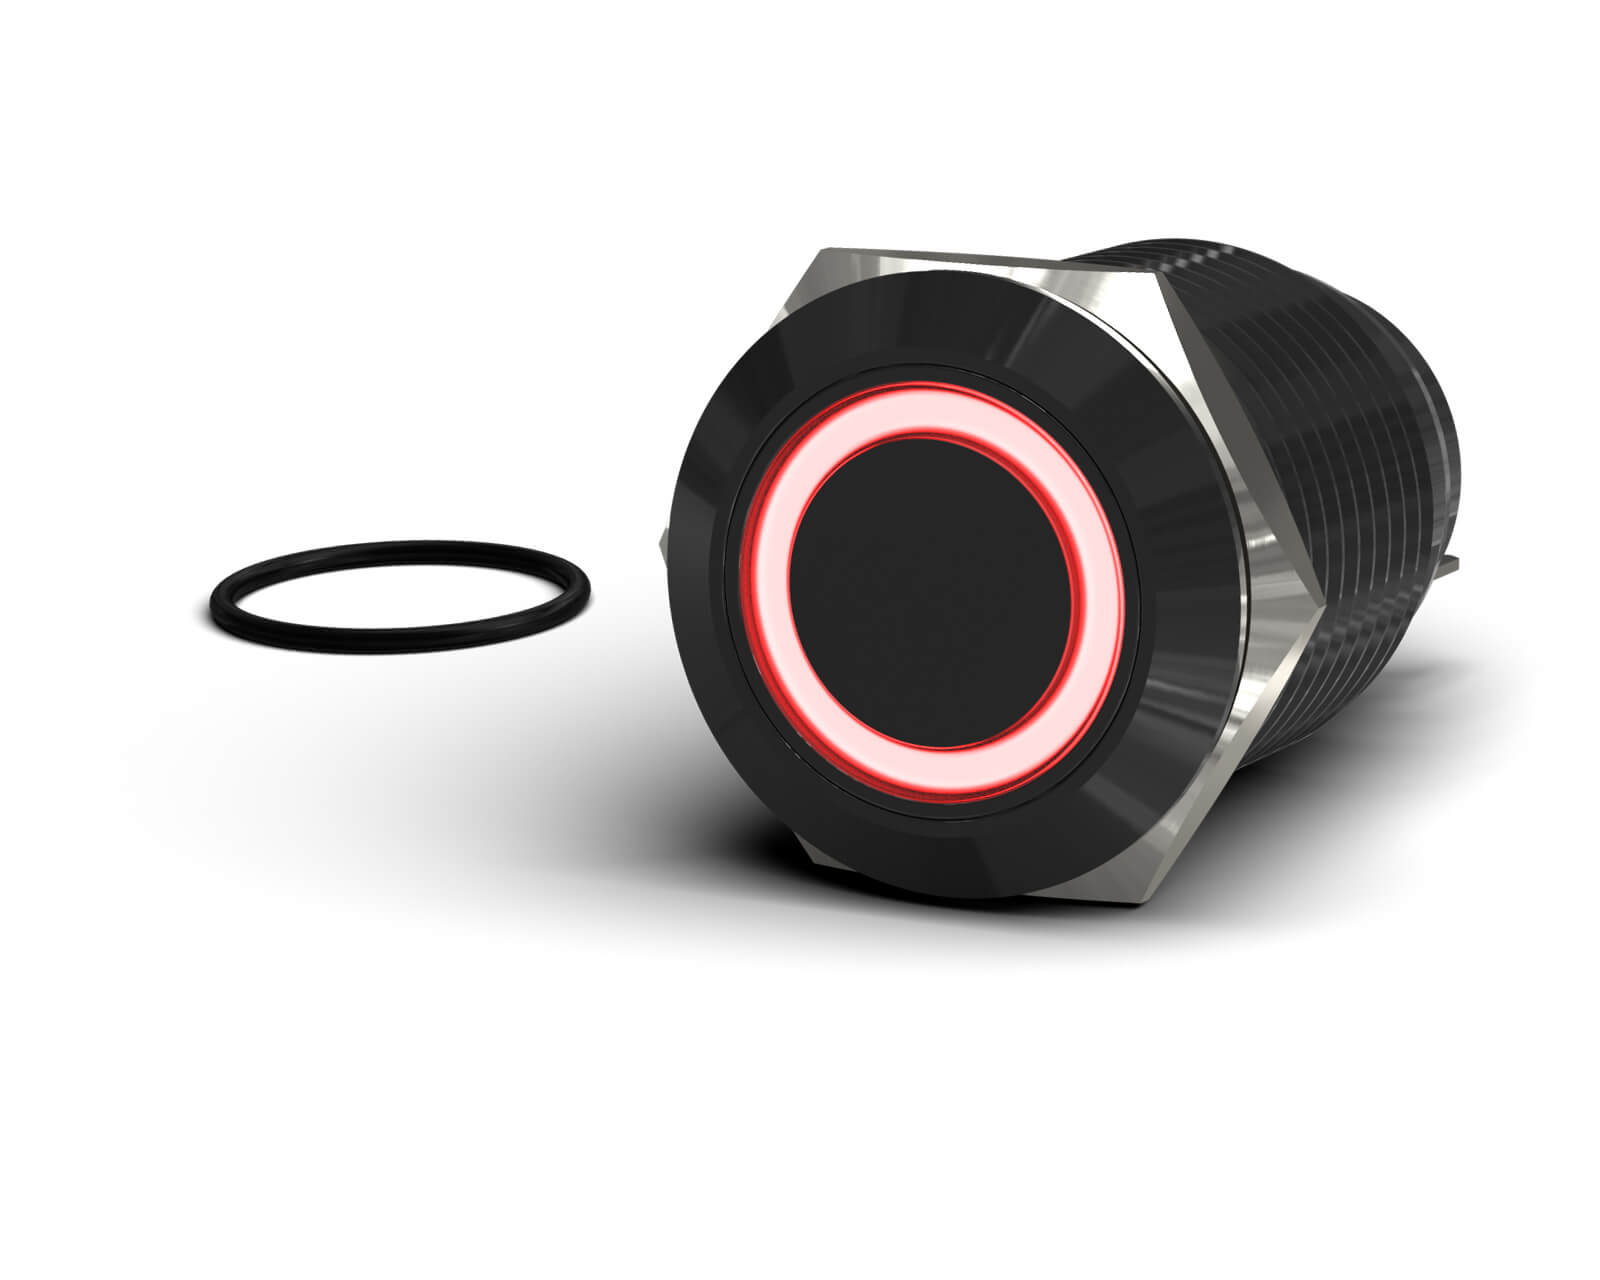 PrimoChill Black Aluminum Latching Vandal Resistant Switch - 22mm - PrimoChill - KEEPING IT COOL Red LED Ring